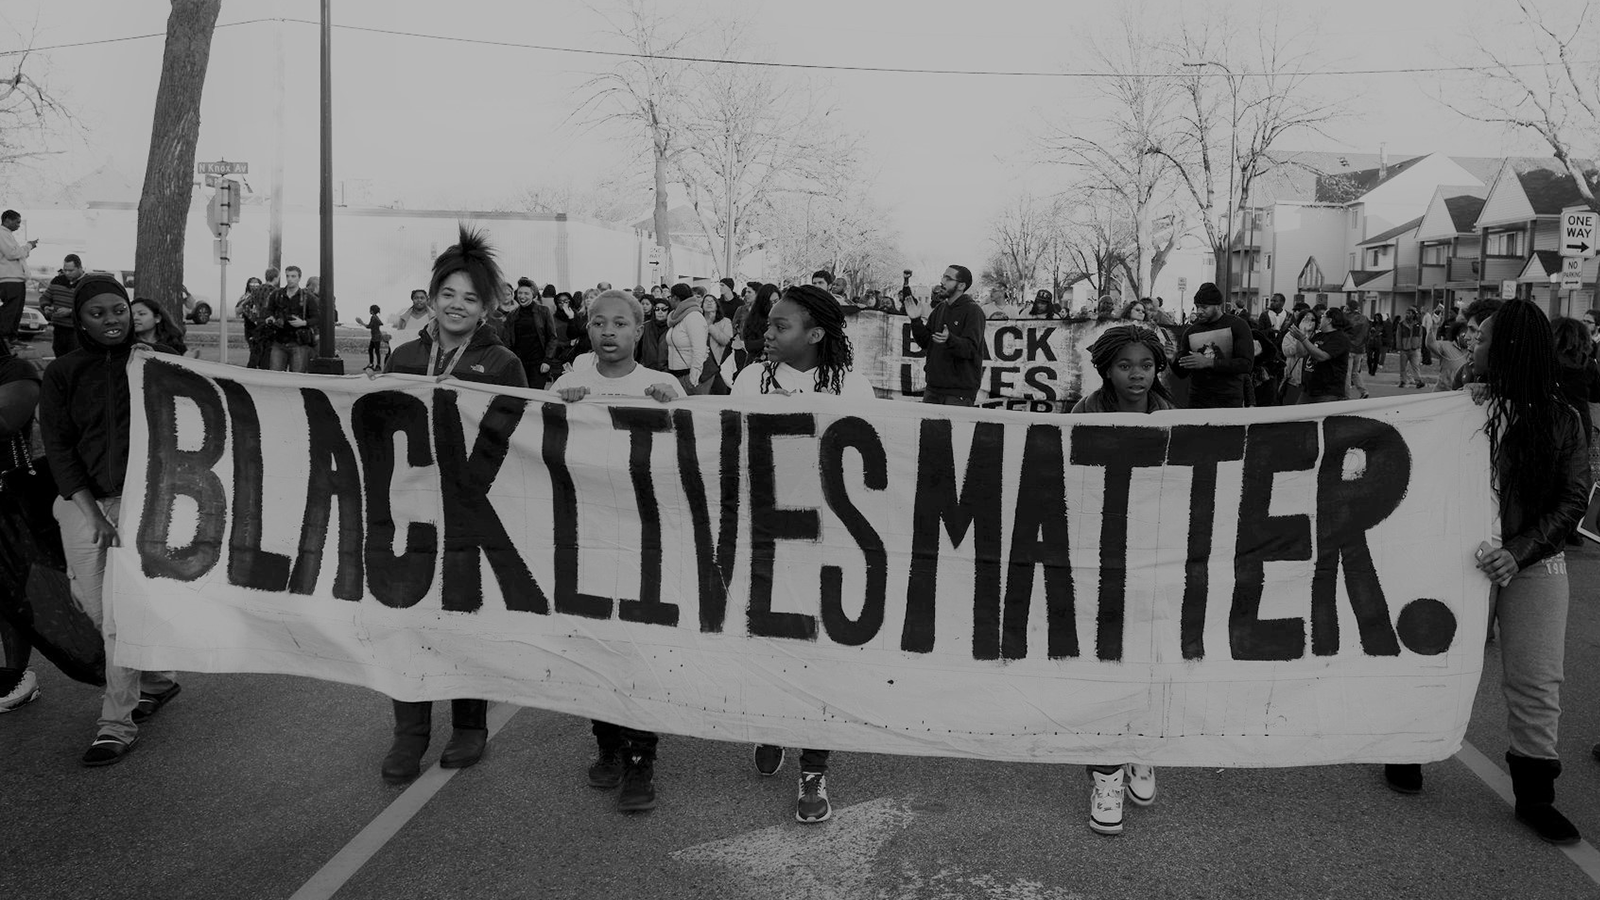 Black Voices Matter: A Personal Reflection